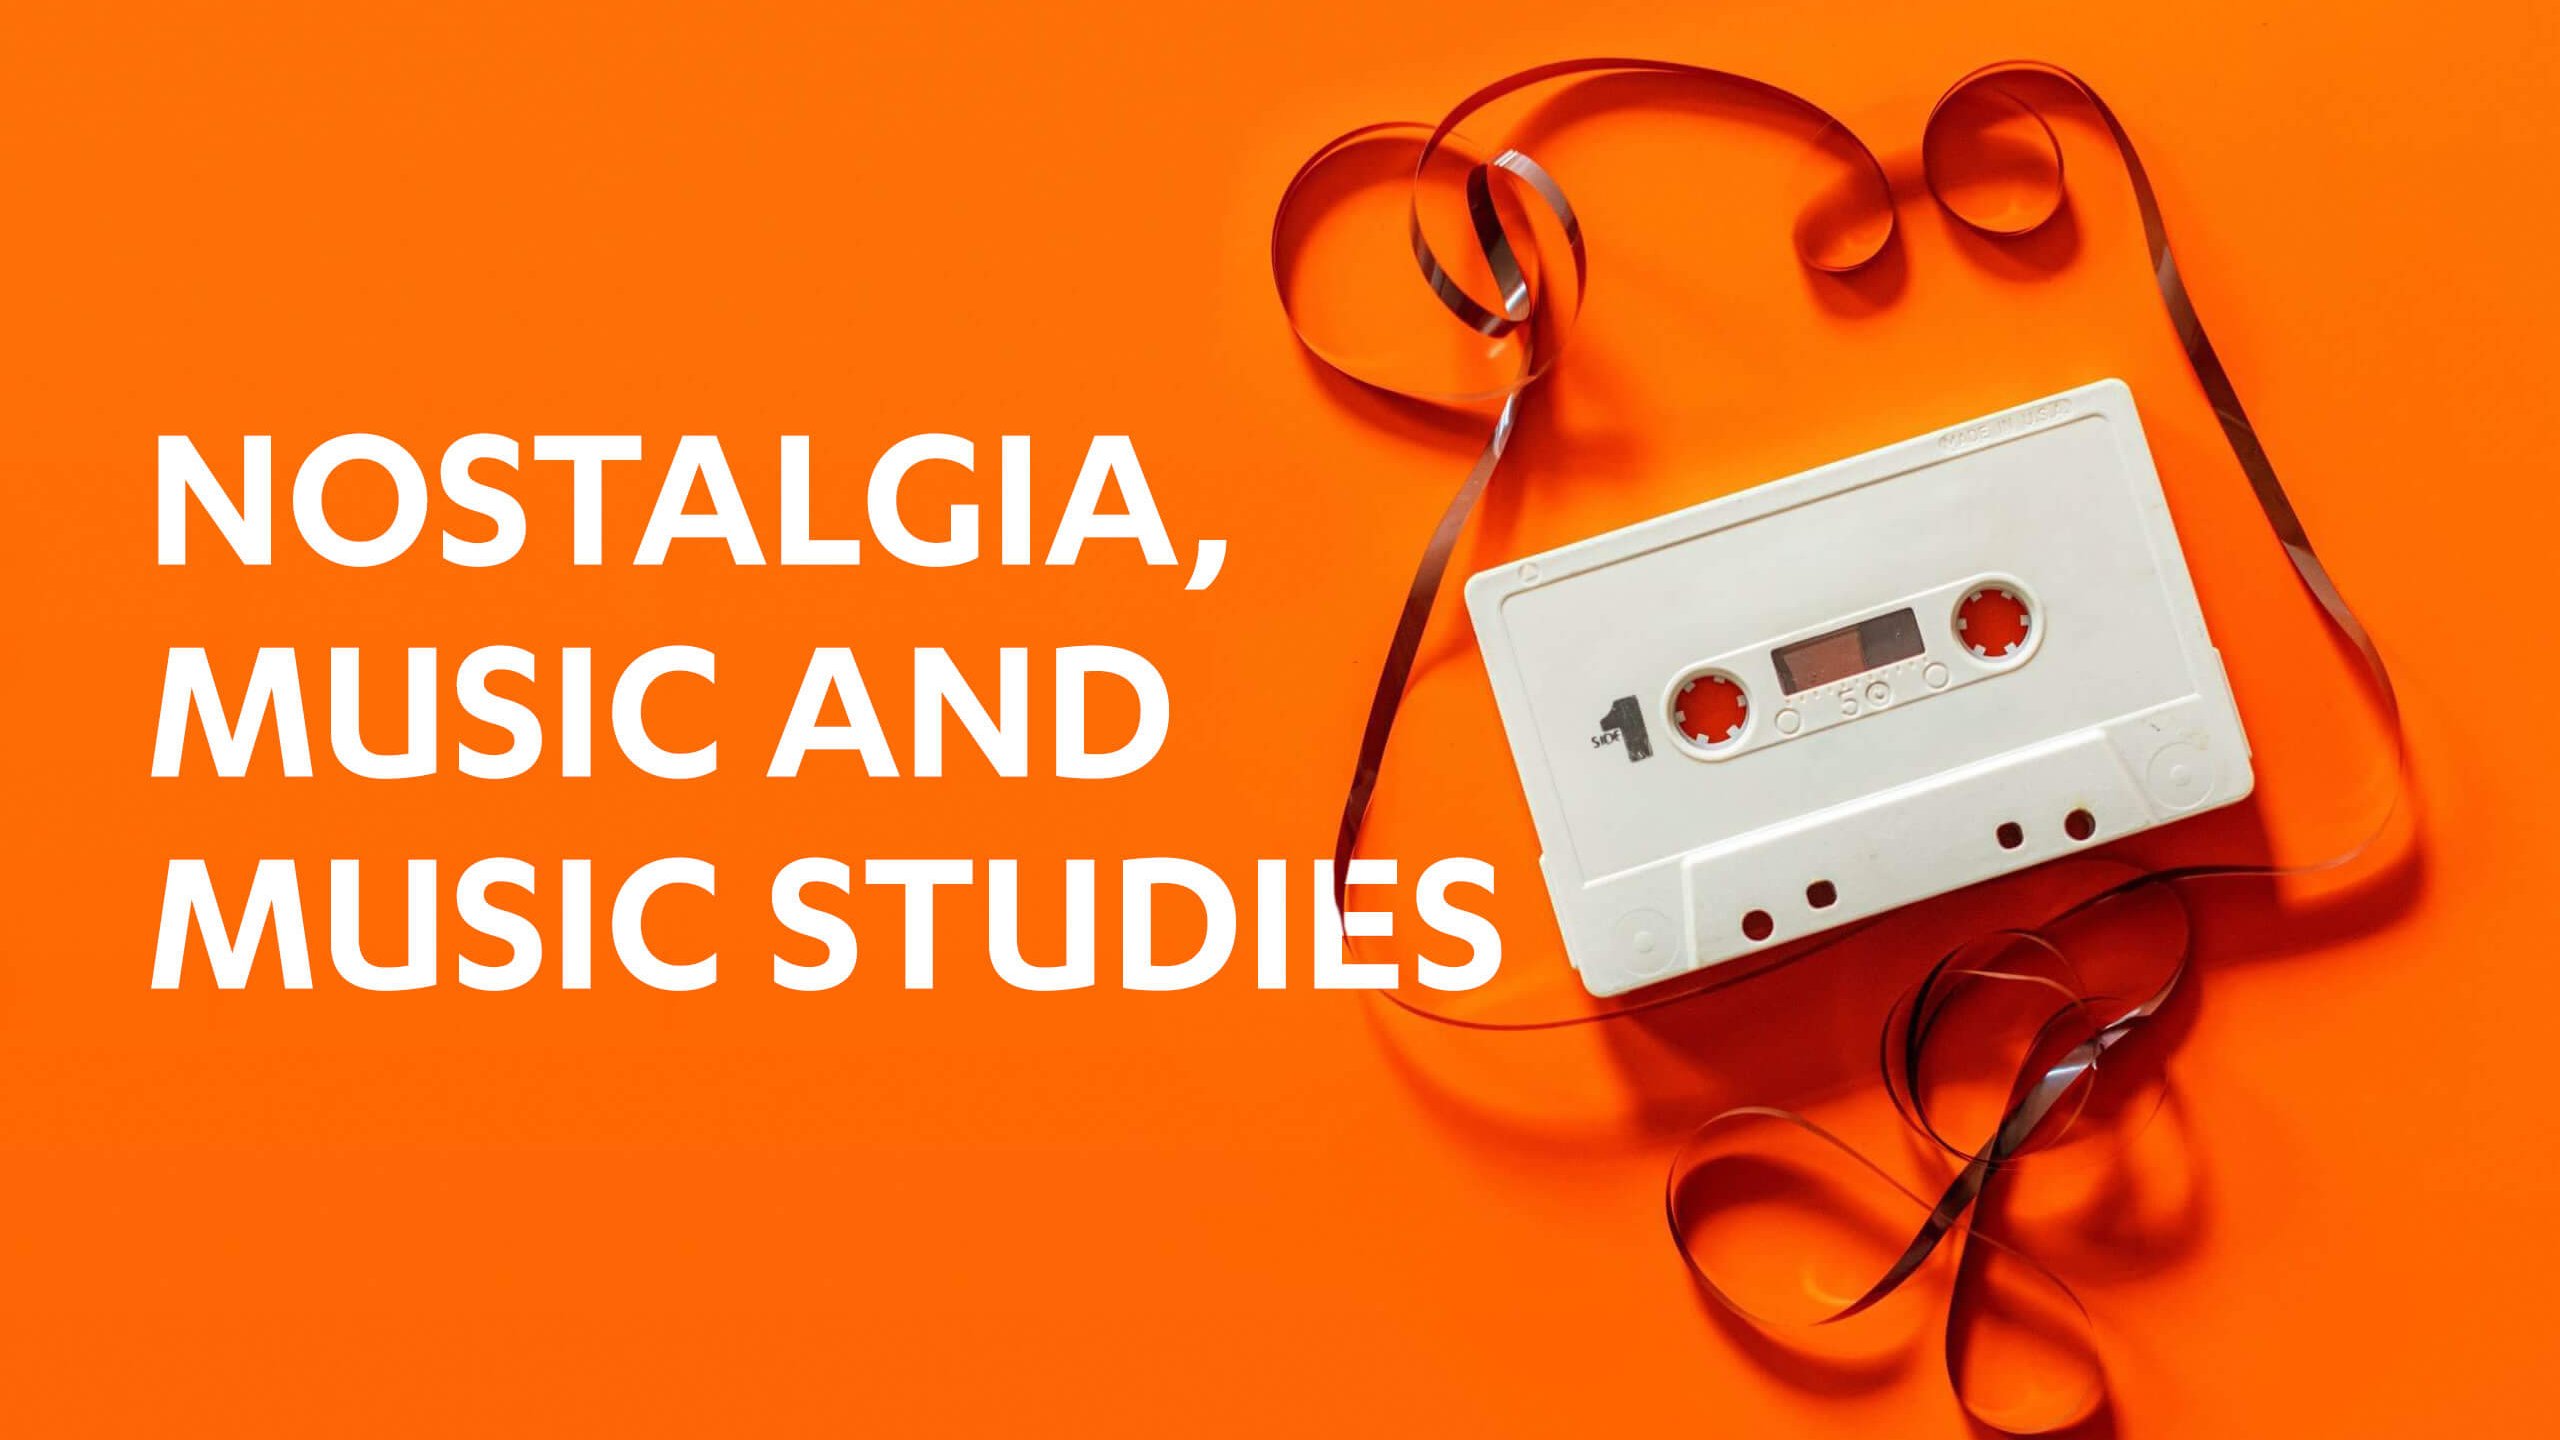 Nostalgia, Music and Music Studies Conference